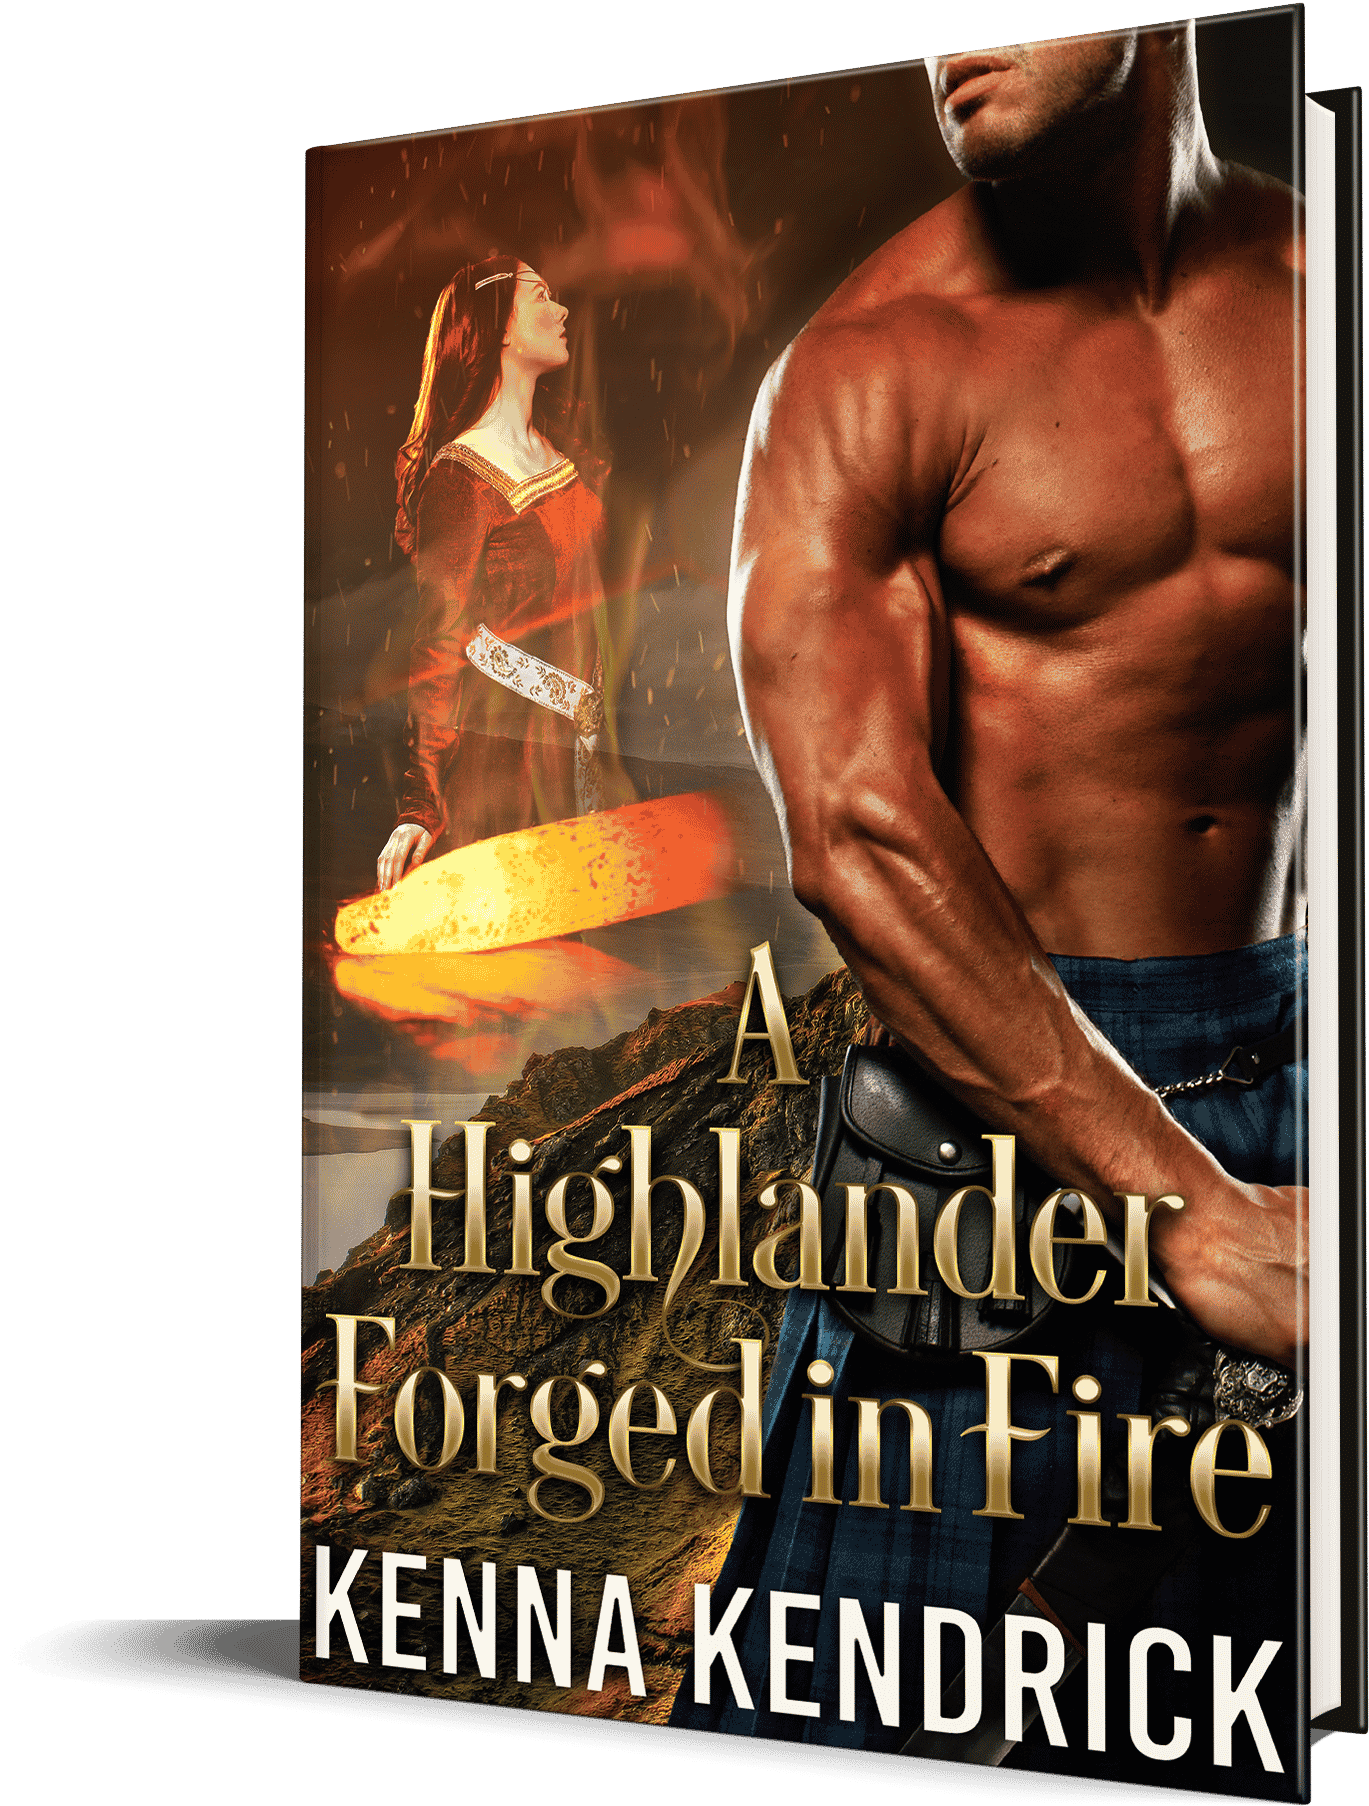 A Highlander Forged in Fire